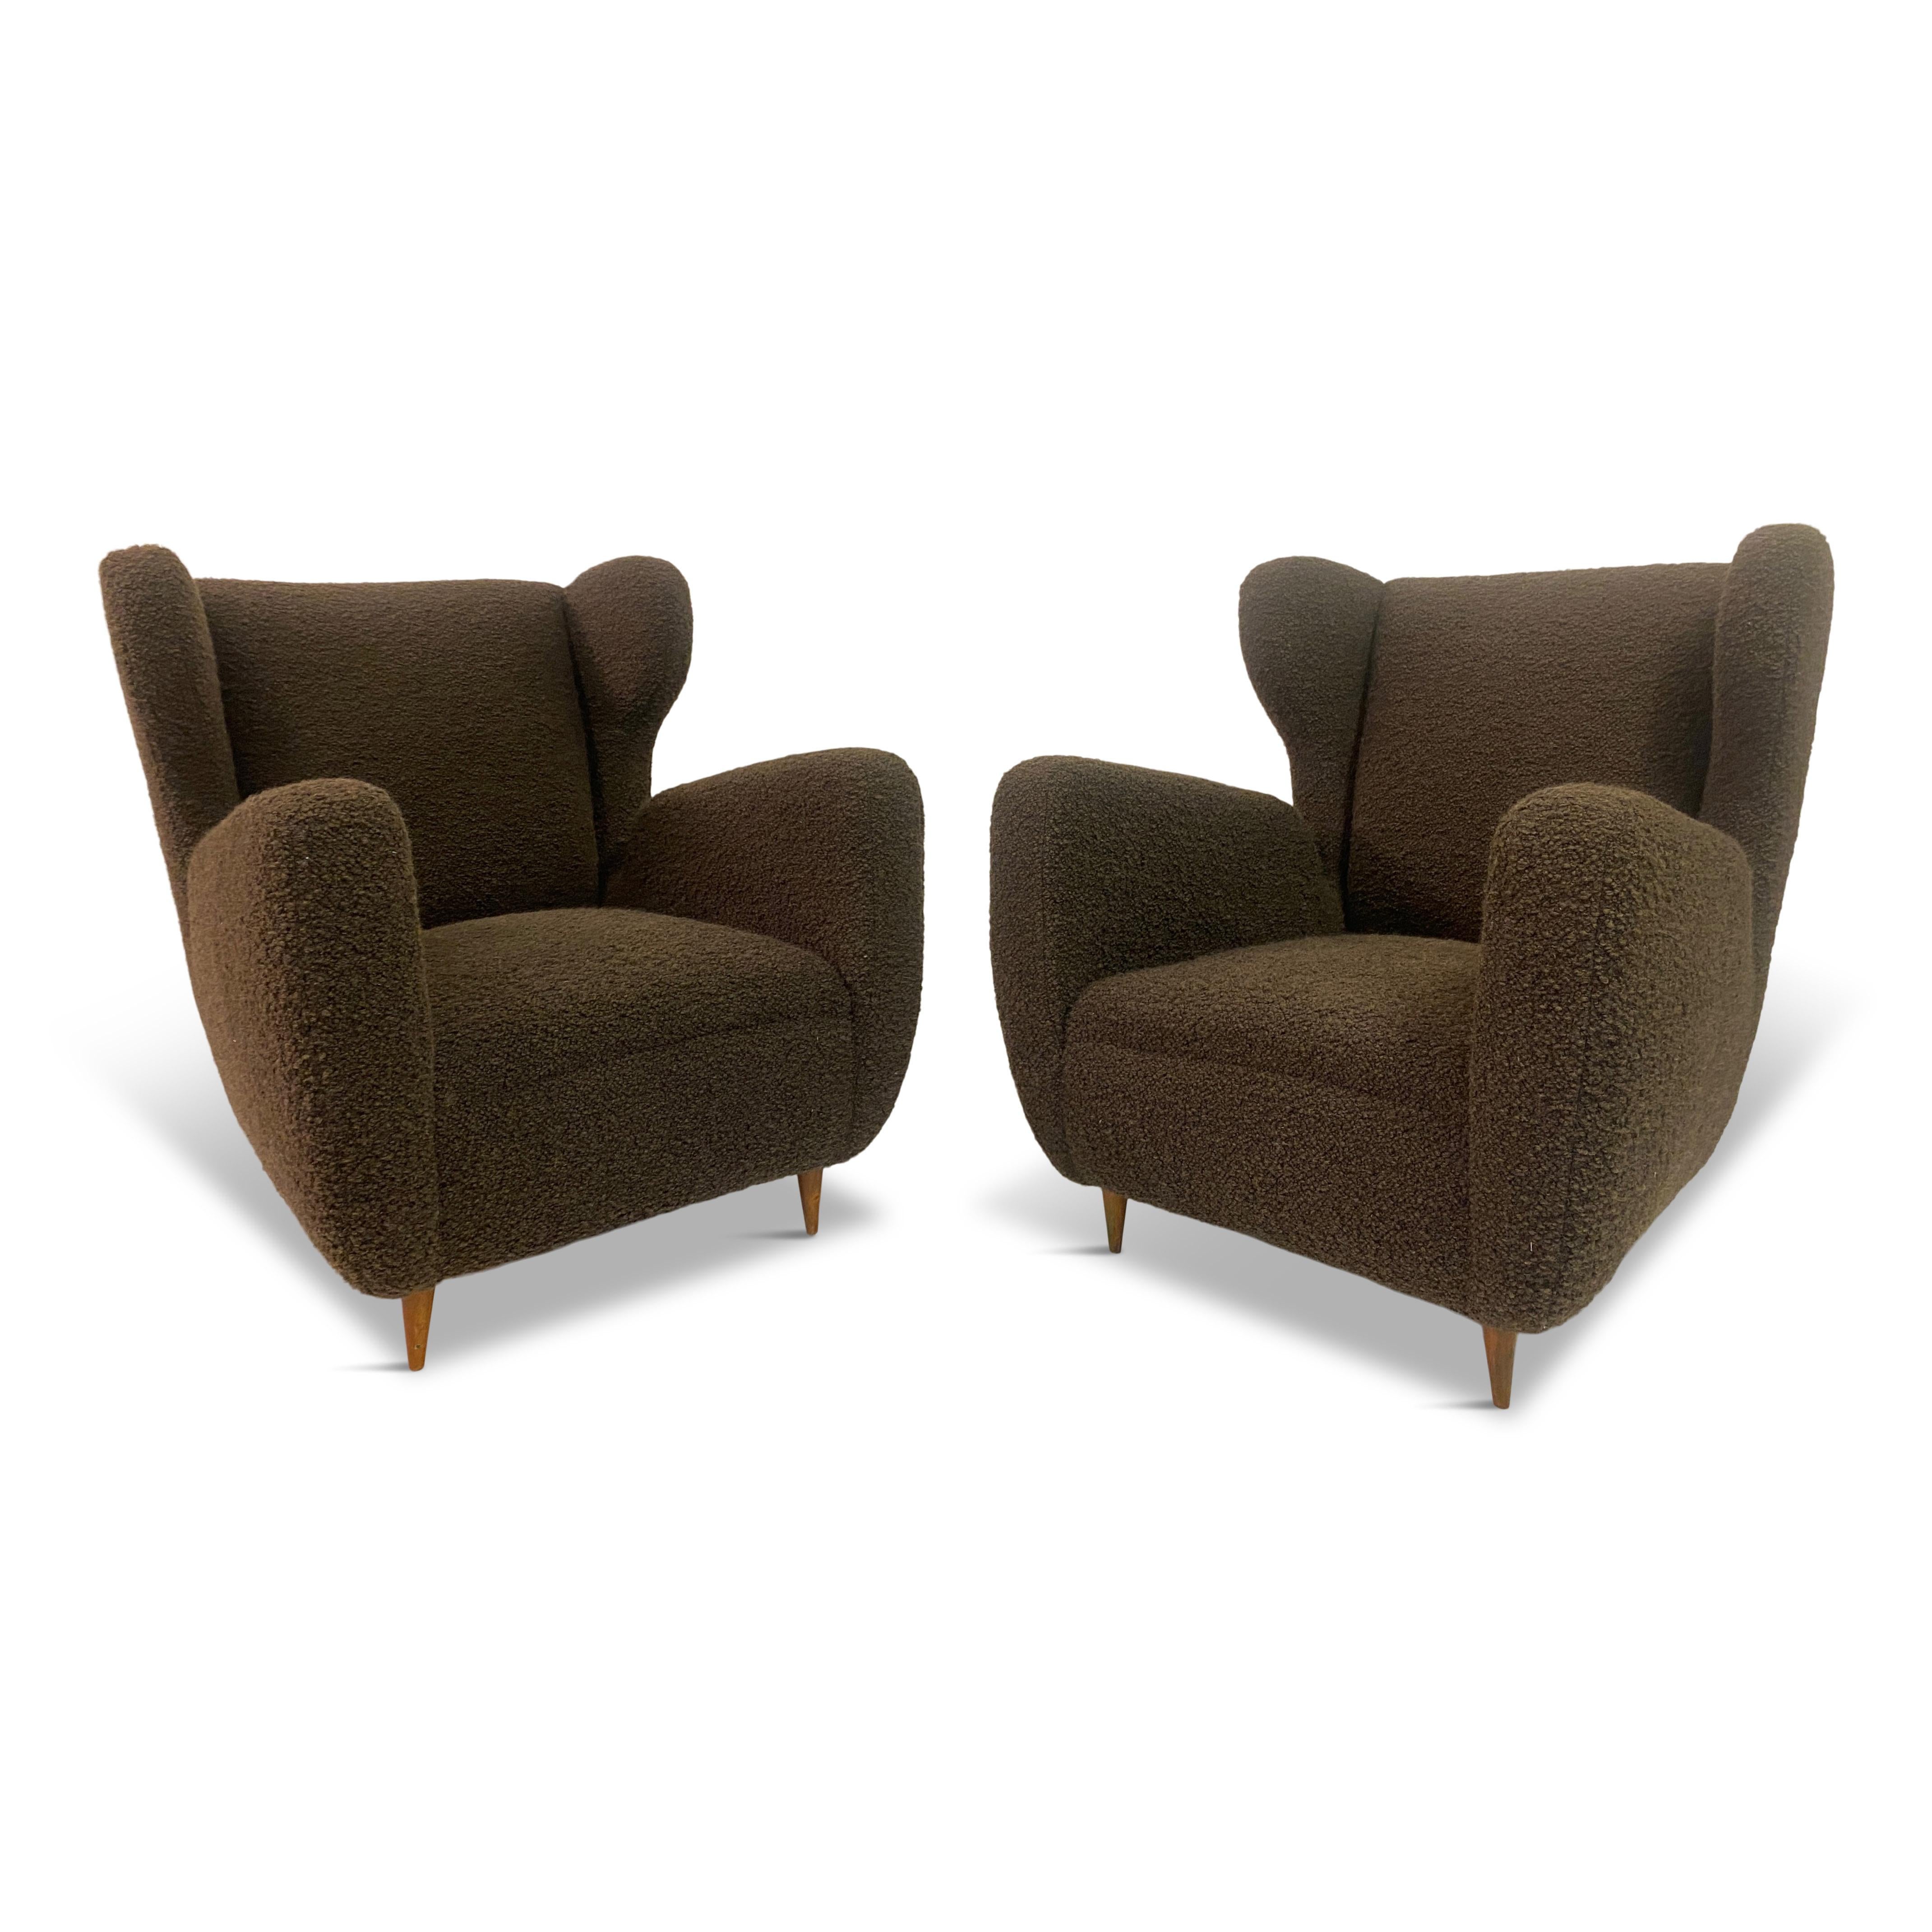 Pair of Large 1950s Italian Armchairs in Chocolate Bouclé For Sale 9